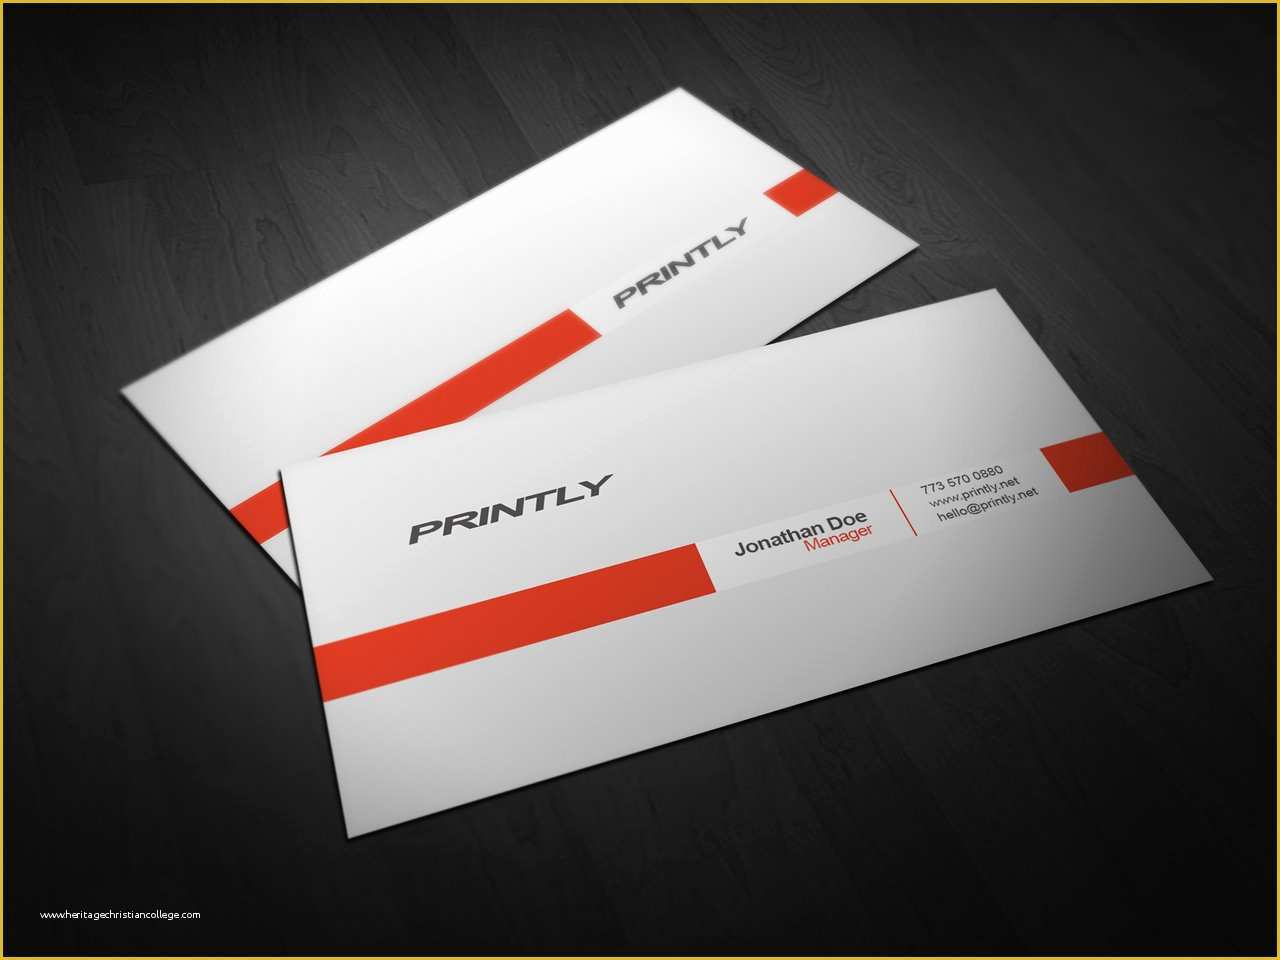 Free Business Card Templates Psd Of Free Printly Business Card Psd Template by Kjarmo On